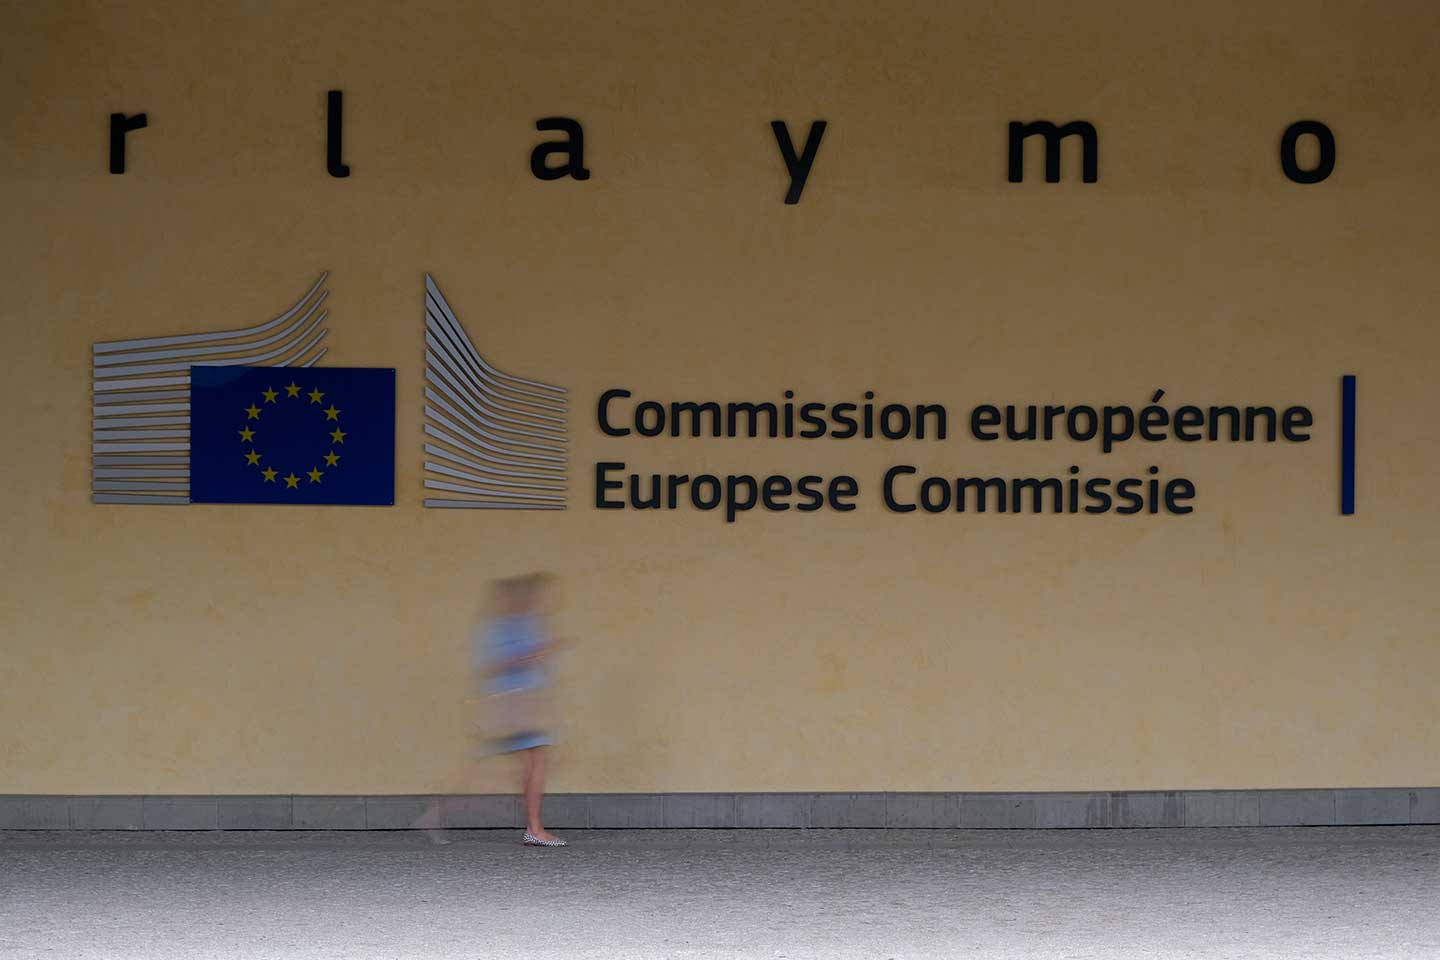 European Union - The European Commission plans to change the format of the Single Administrative Document (SAD) in 2023